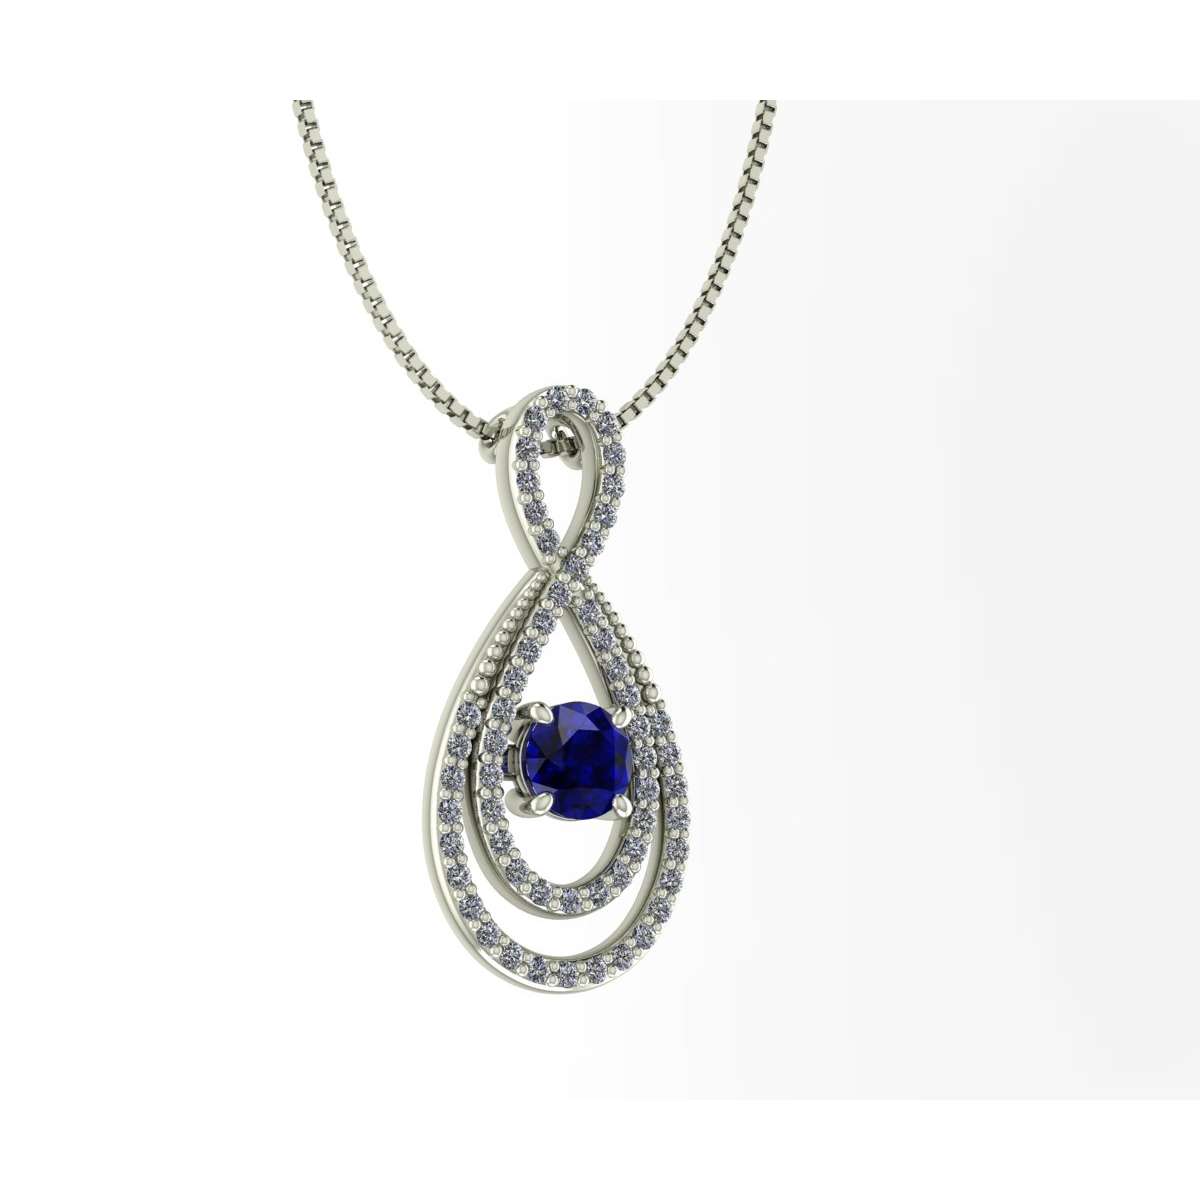 Woman's necklace pendant in the shape of infinity blue sapphire ct 0.38 ct 0.21g-vs1 diamonds